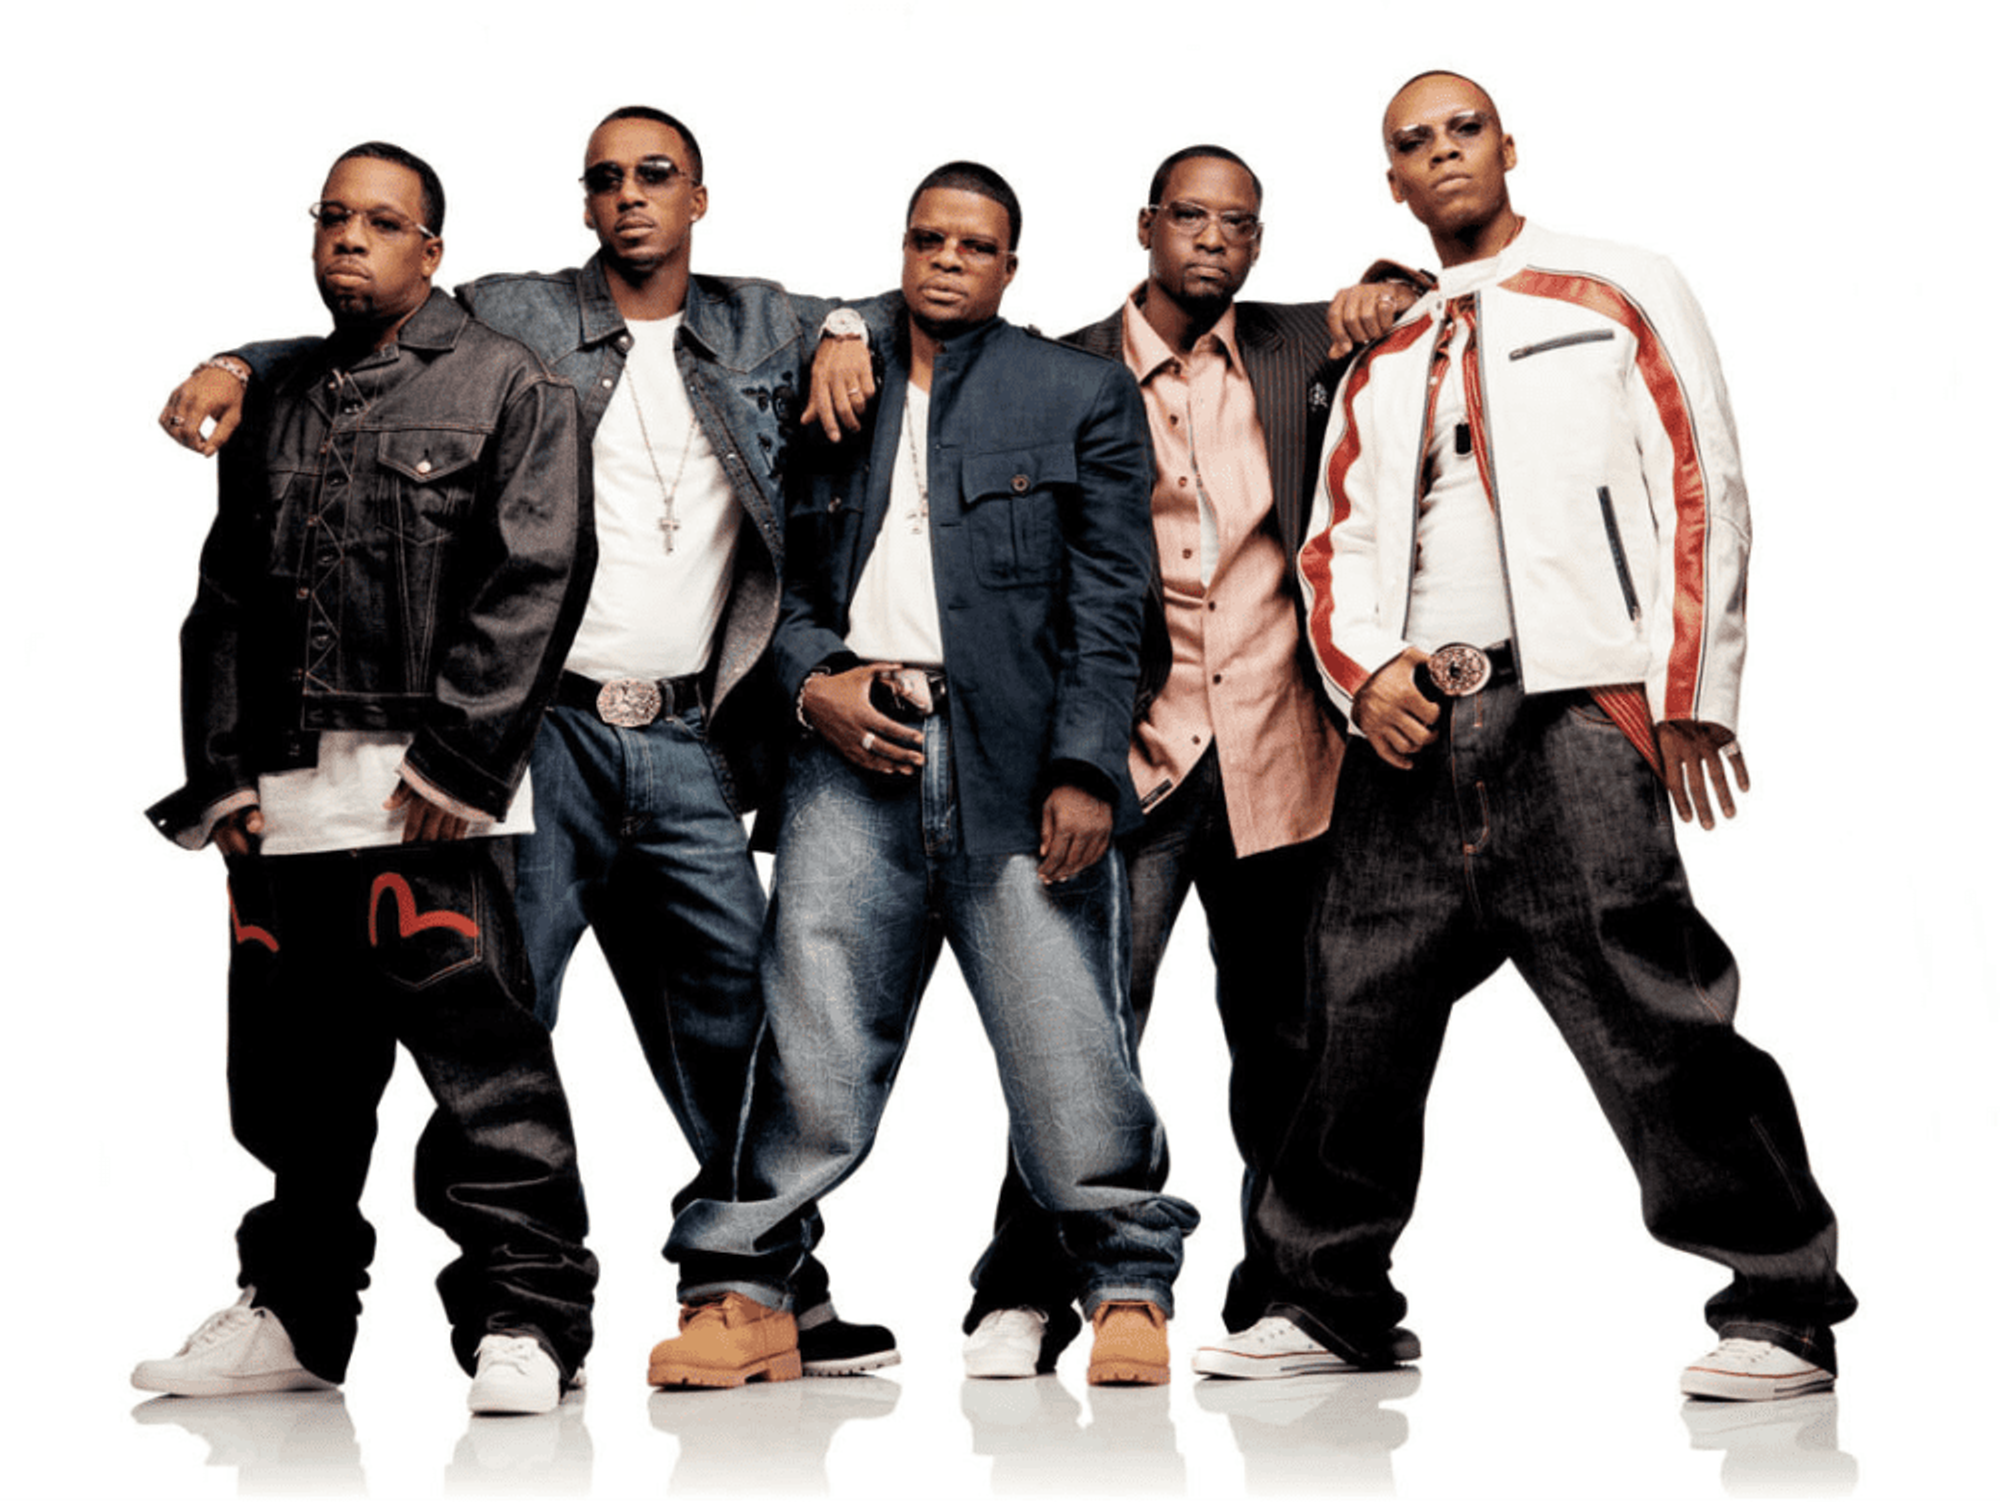 New Edition, minus Bobby Brown in this picture, will once again be six strong when they appear at Verizon Theatre at Grand Praire on July 12.